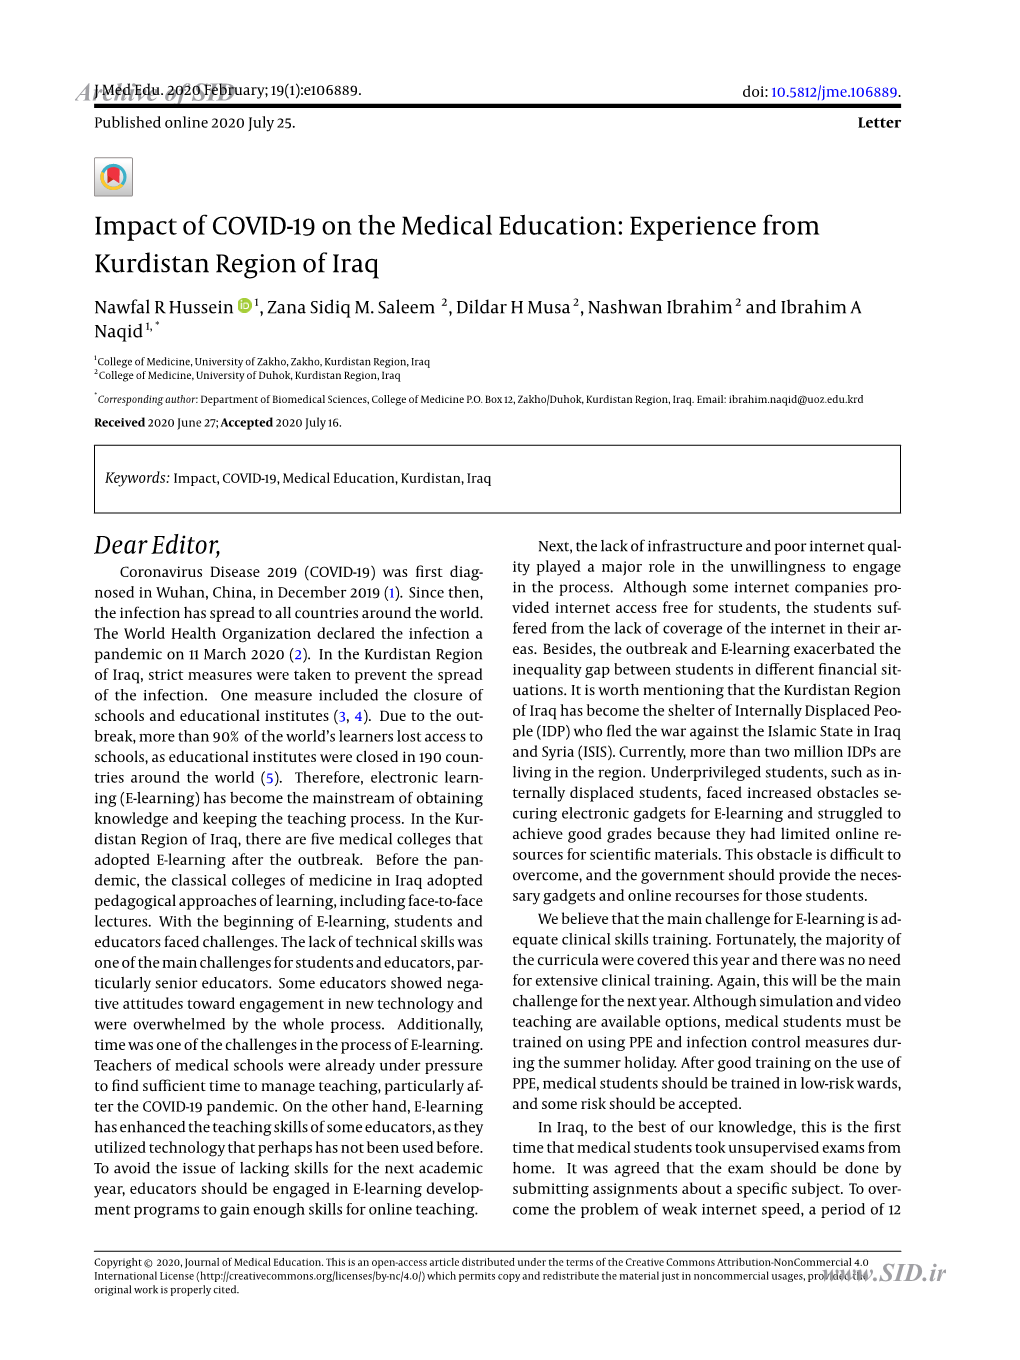 Impact of COVID-19 on the Medical Education: Experience from Kurdistan Region of Iraq